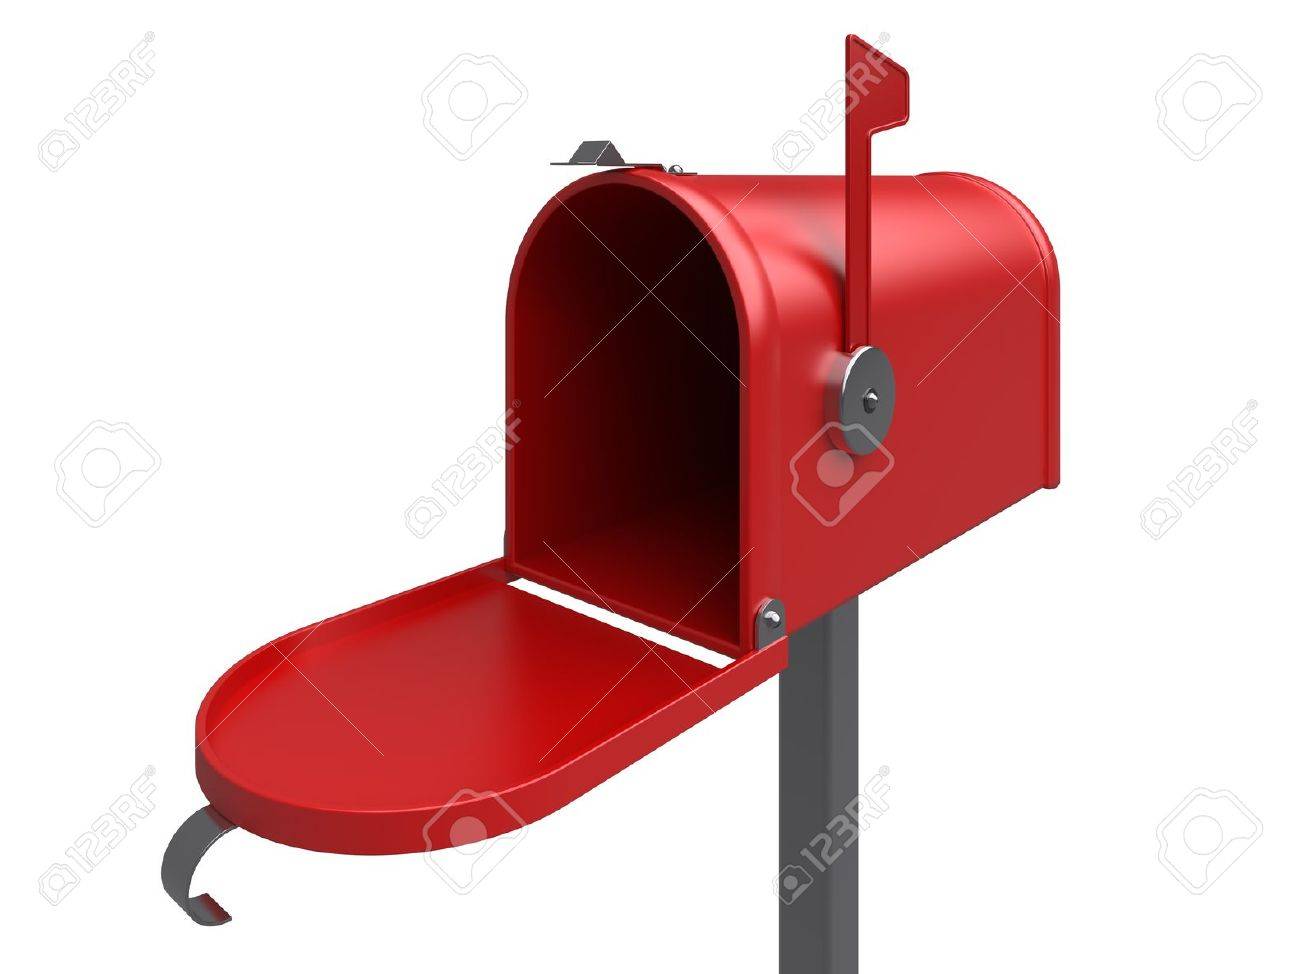 11740250-Open-mailbox-Isolated-3d-image-Stock-Photo-mailbox.jpg